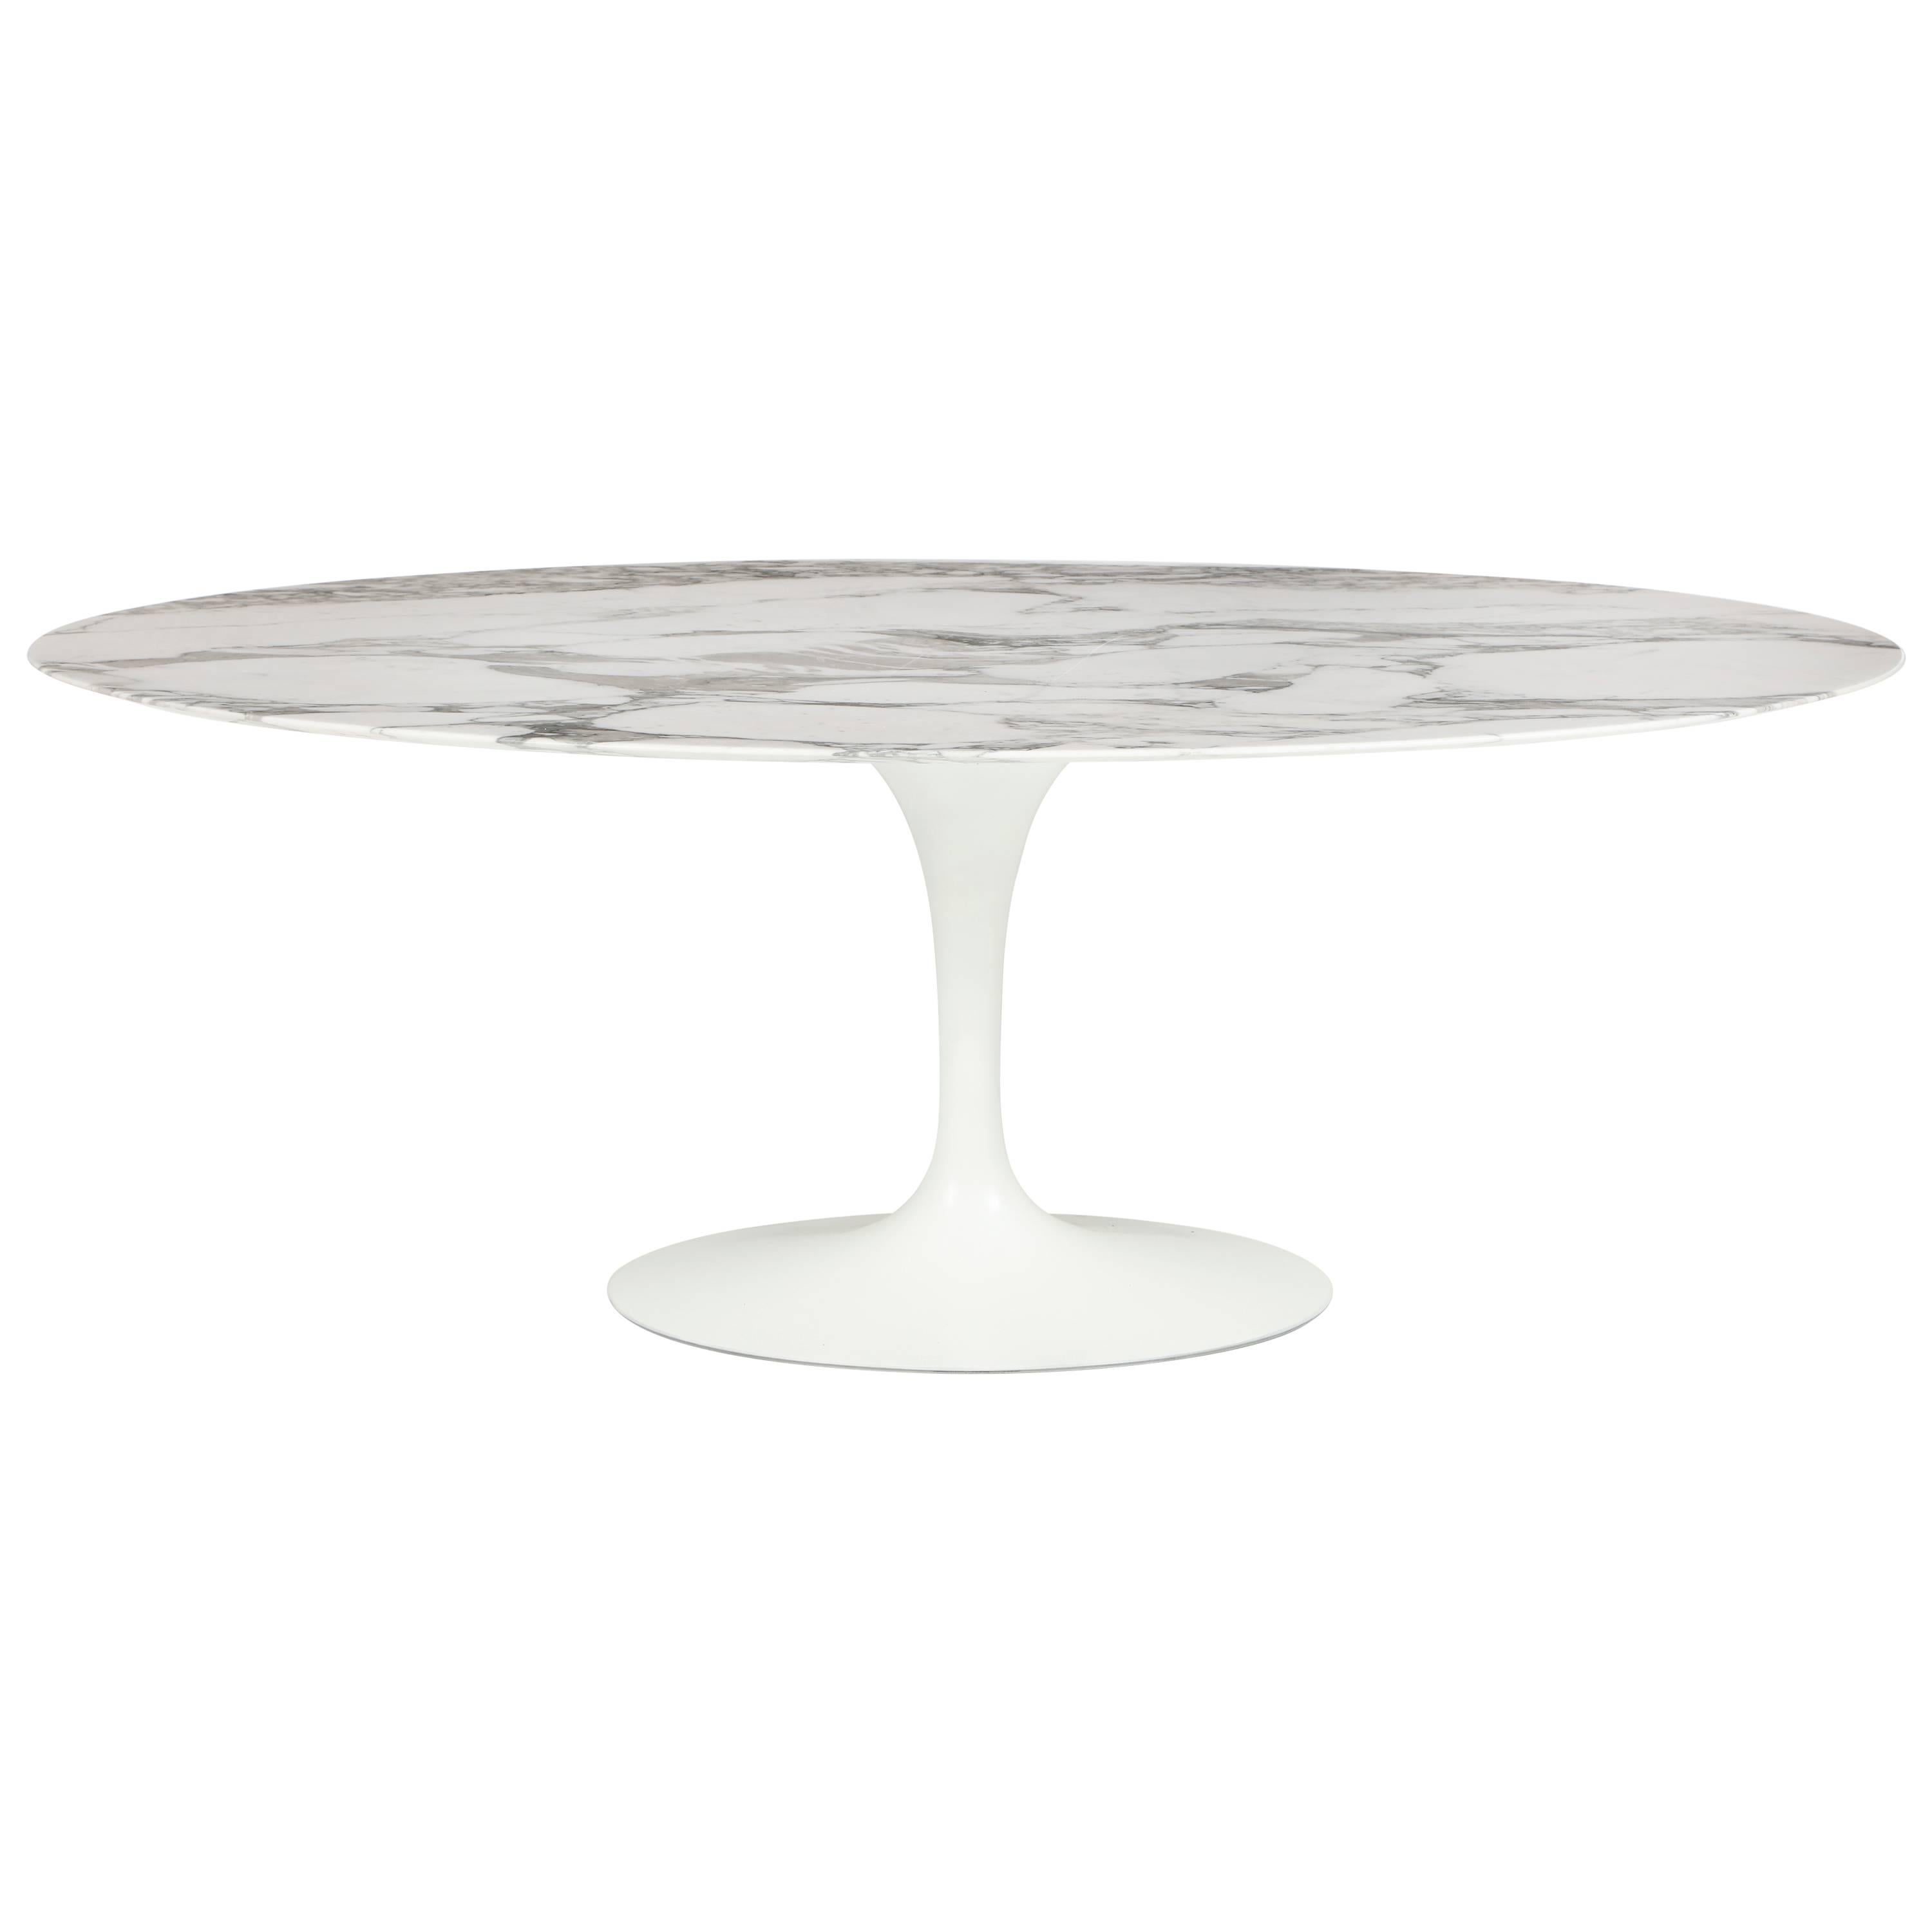 Large Oval Marble Tulip Dining Table by Eero Saarinen for Knoll